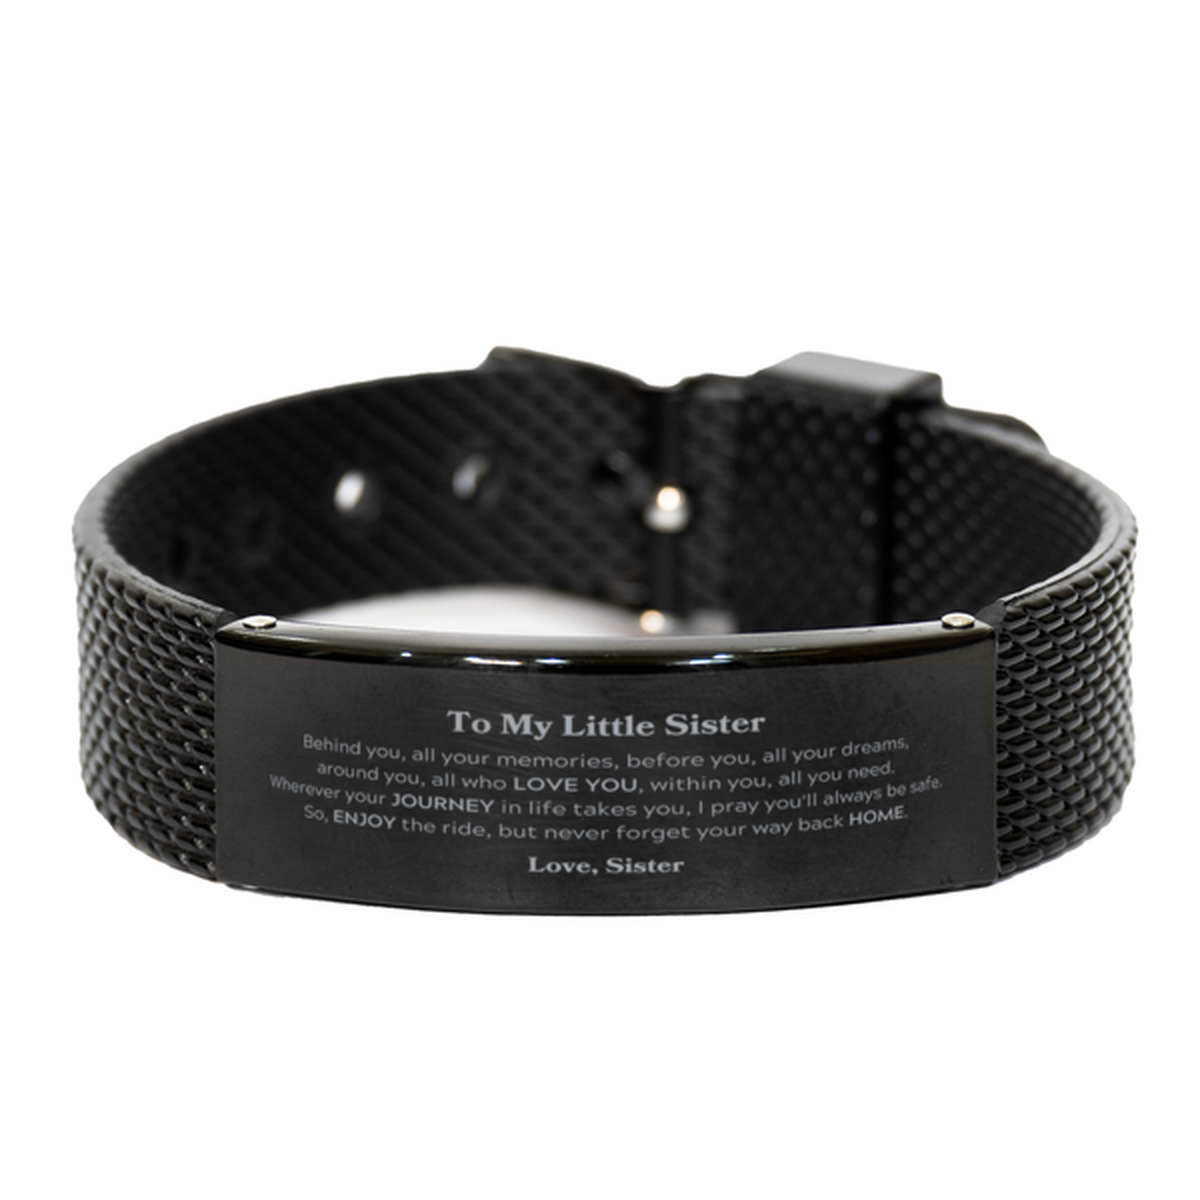 To My Little Sister Graduation Gifts from Sister, Little Sister Black Shark Mesh Bracelet Christmas Birthday Gifts for Little Sister Behind you, all your memories, before you, all your dreams. Love, Sister